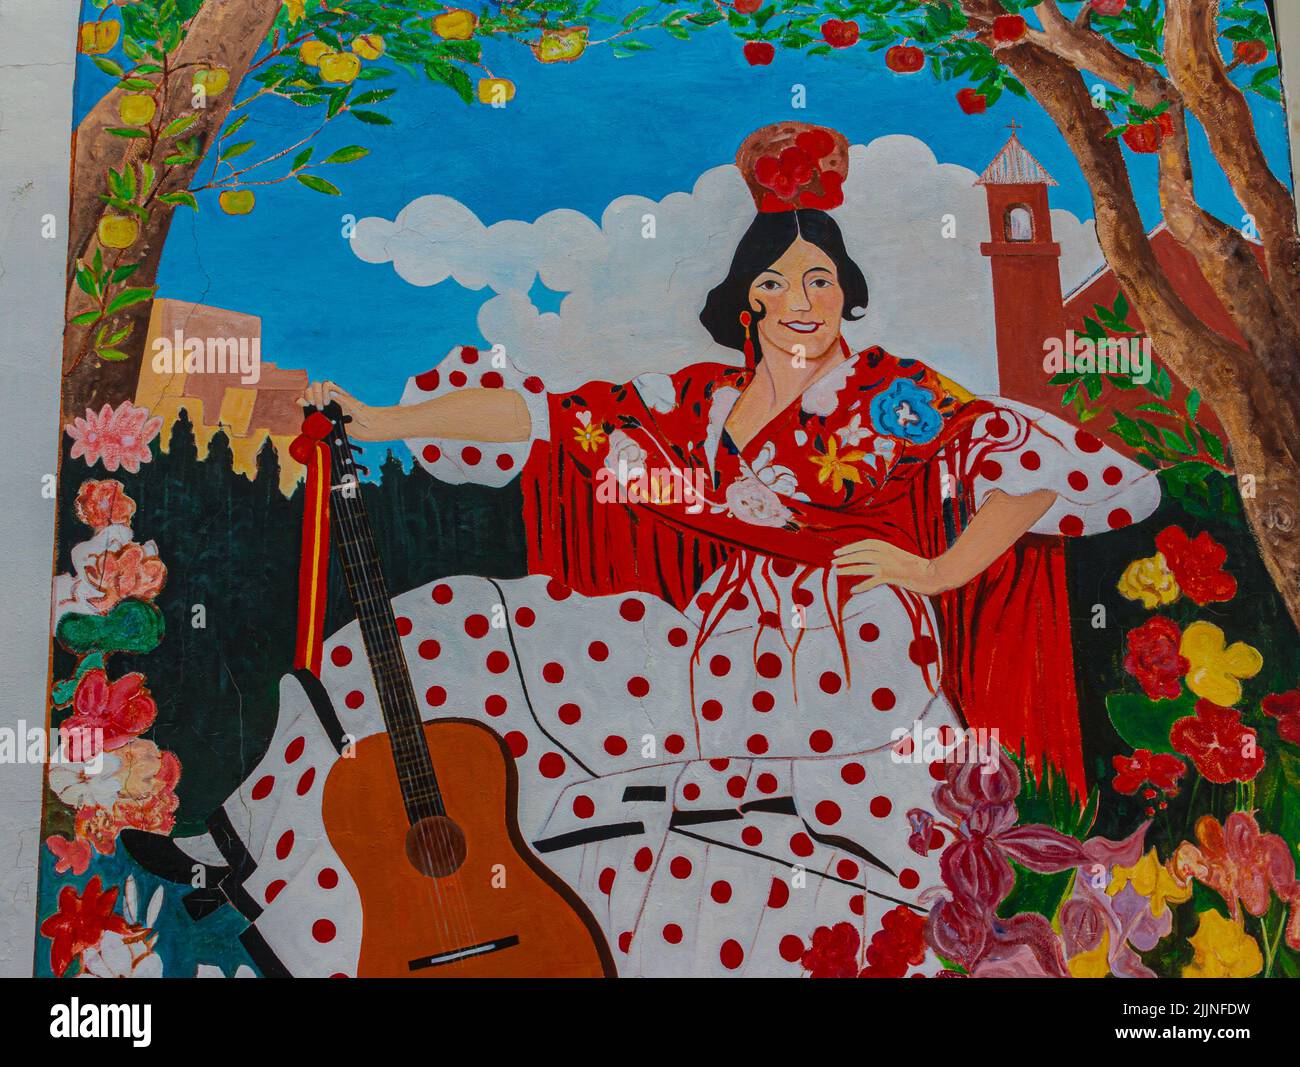 Mural of Spanish Maiden Painted on Adobe Wall, Espanola, New Mexico, USA Stock Photo